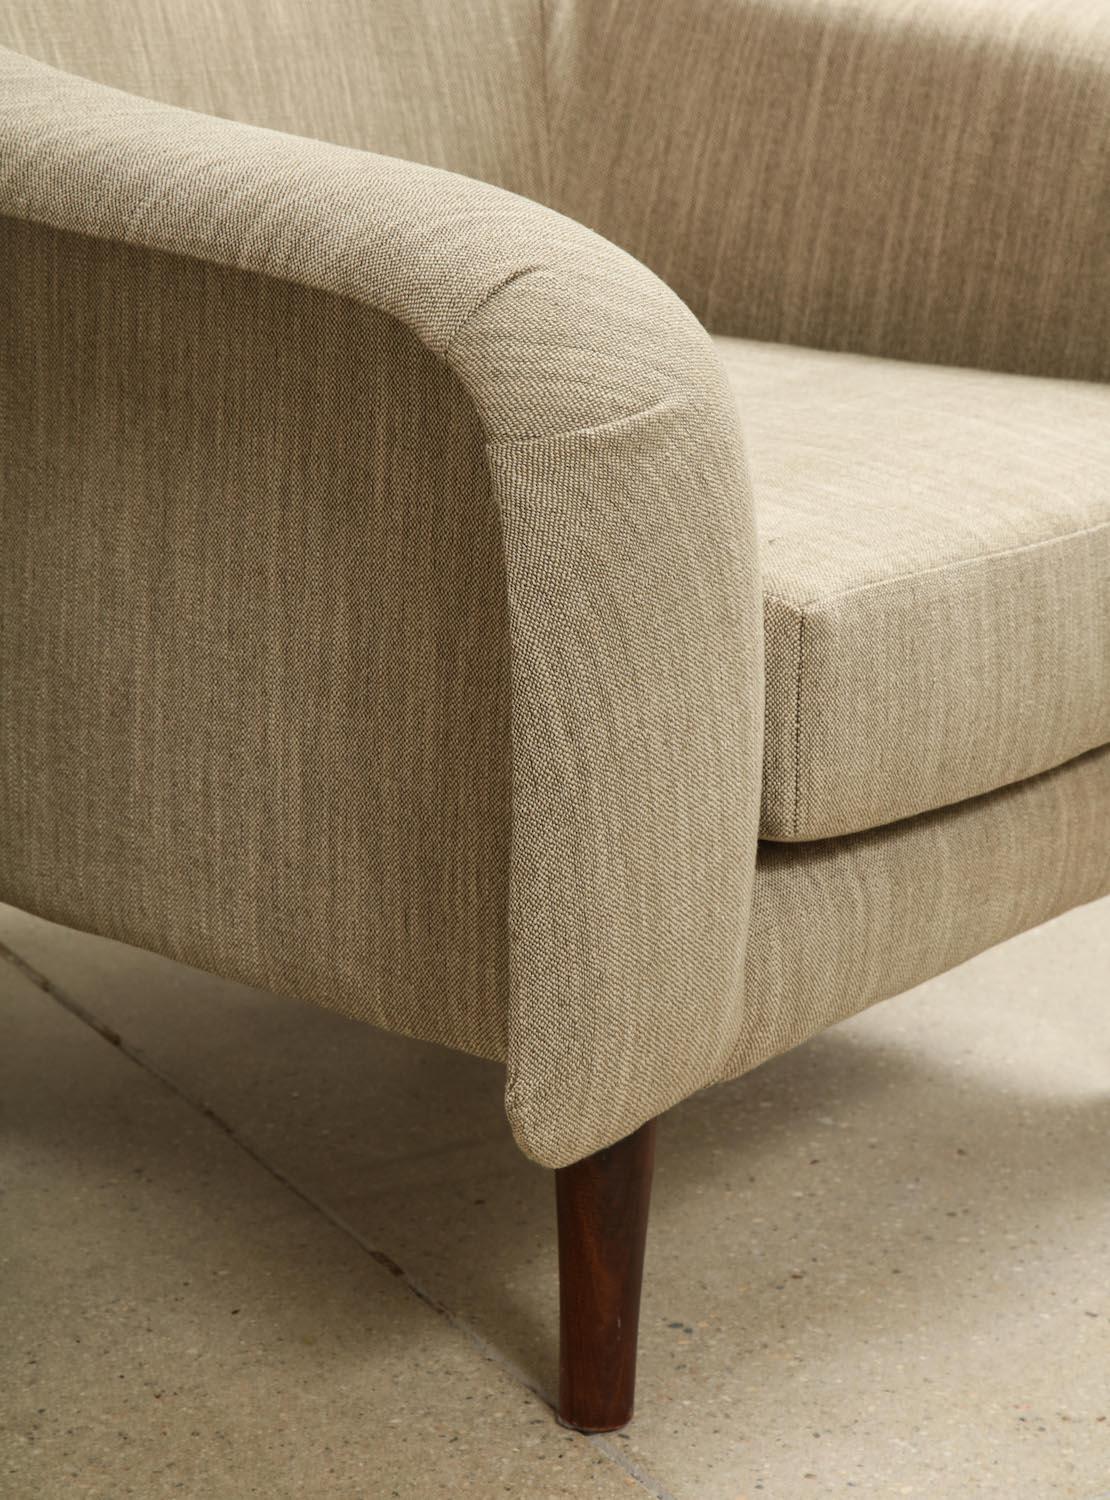 Beautifully sculpted upholstered seat forms displaying an interesting tension between bulbous form and the seek detailing. Conical legs of Jacaranda.